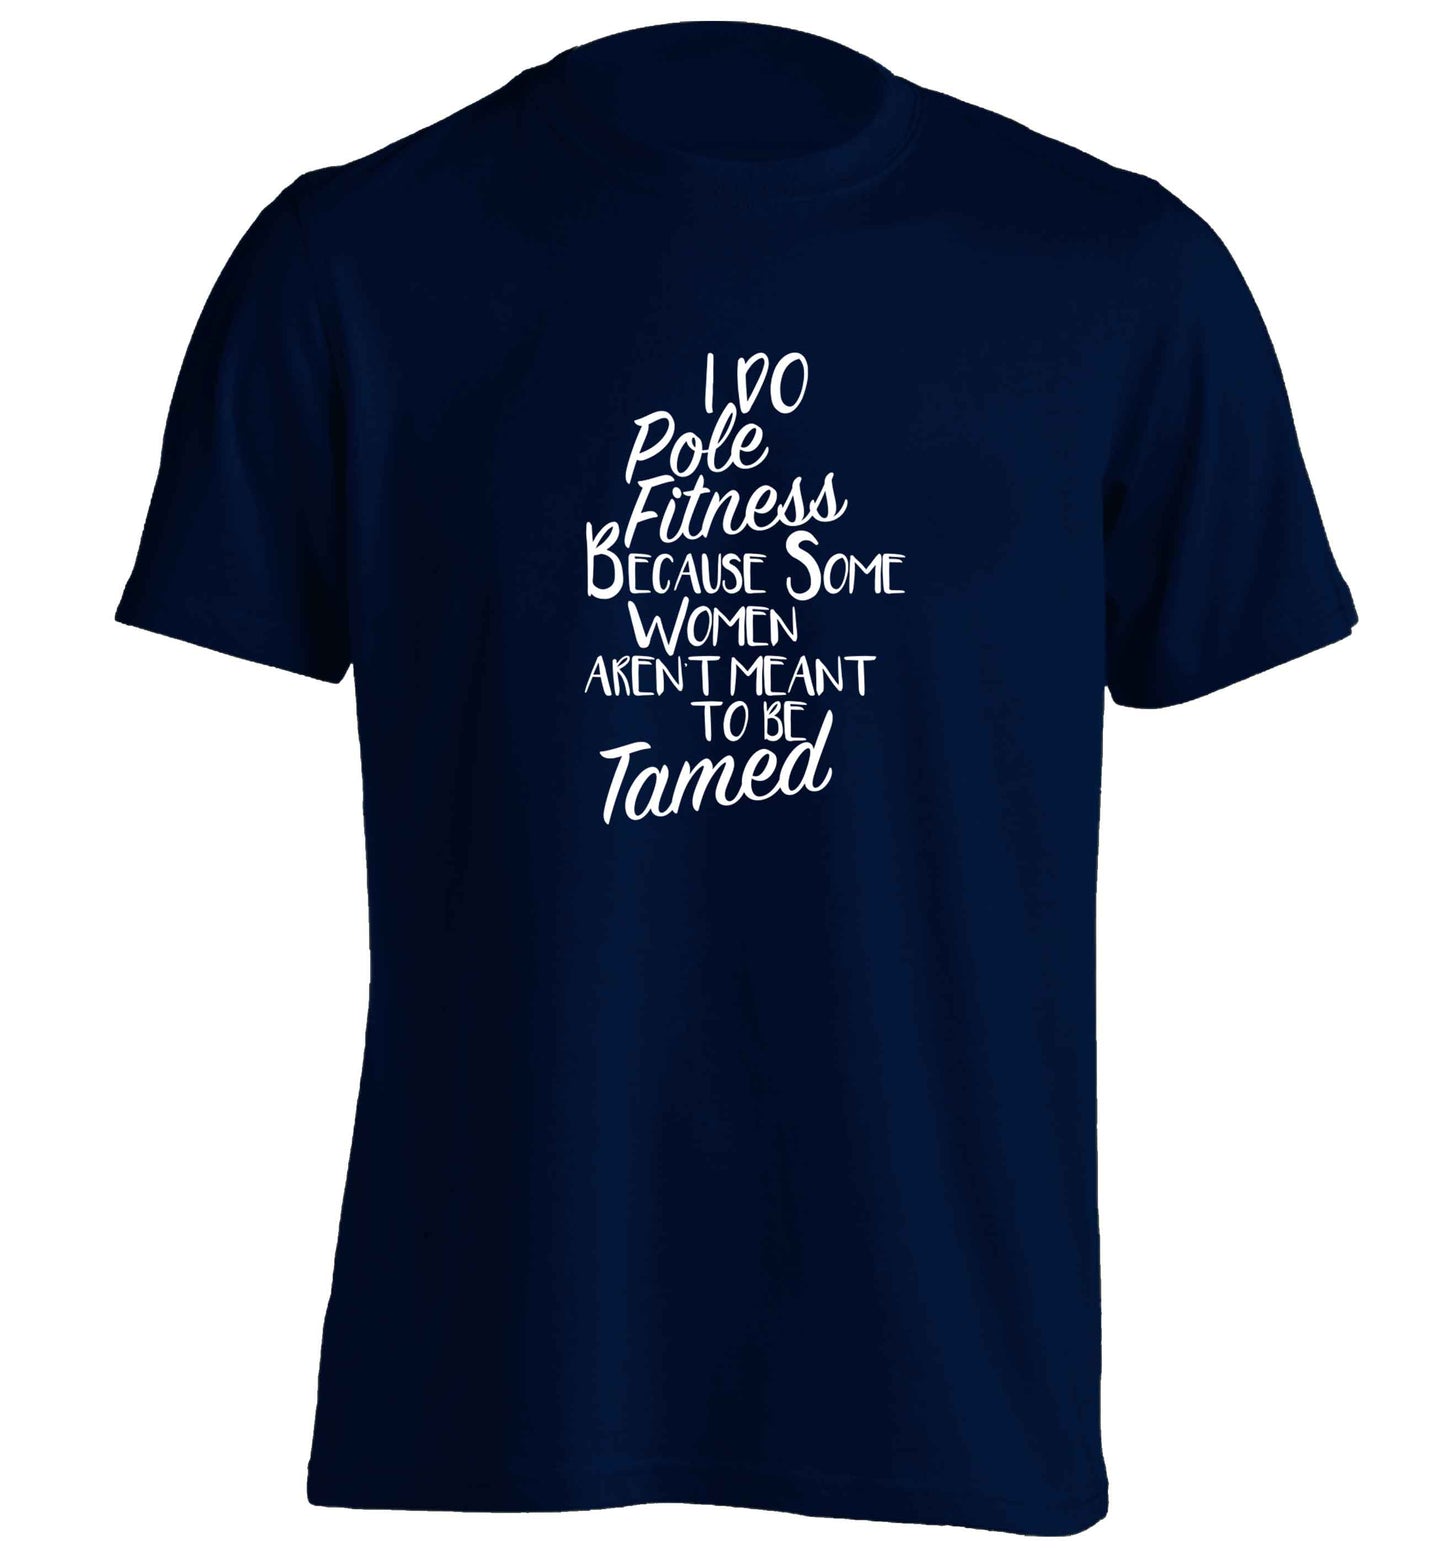 I do pole fitness because some women aren't meant to be tamed adults unisex navy Tshirt 2XL